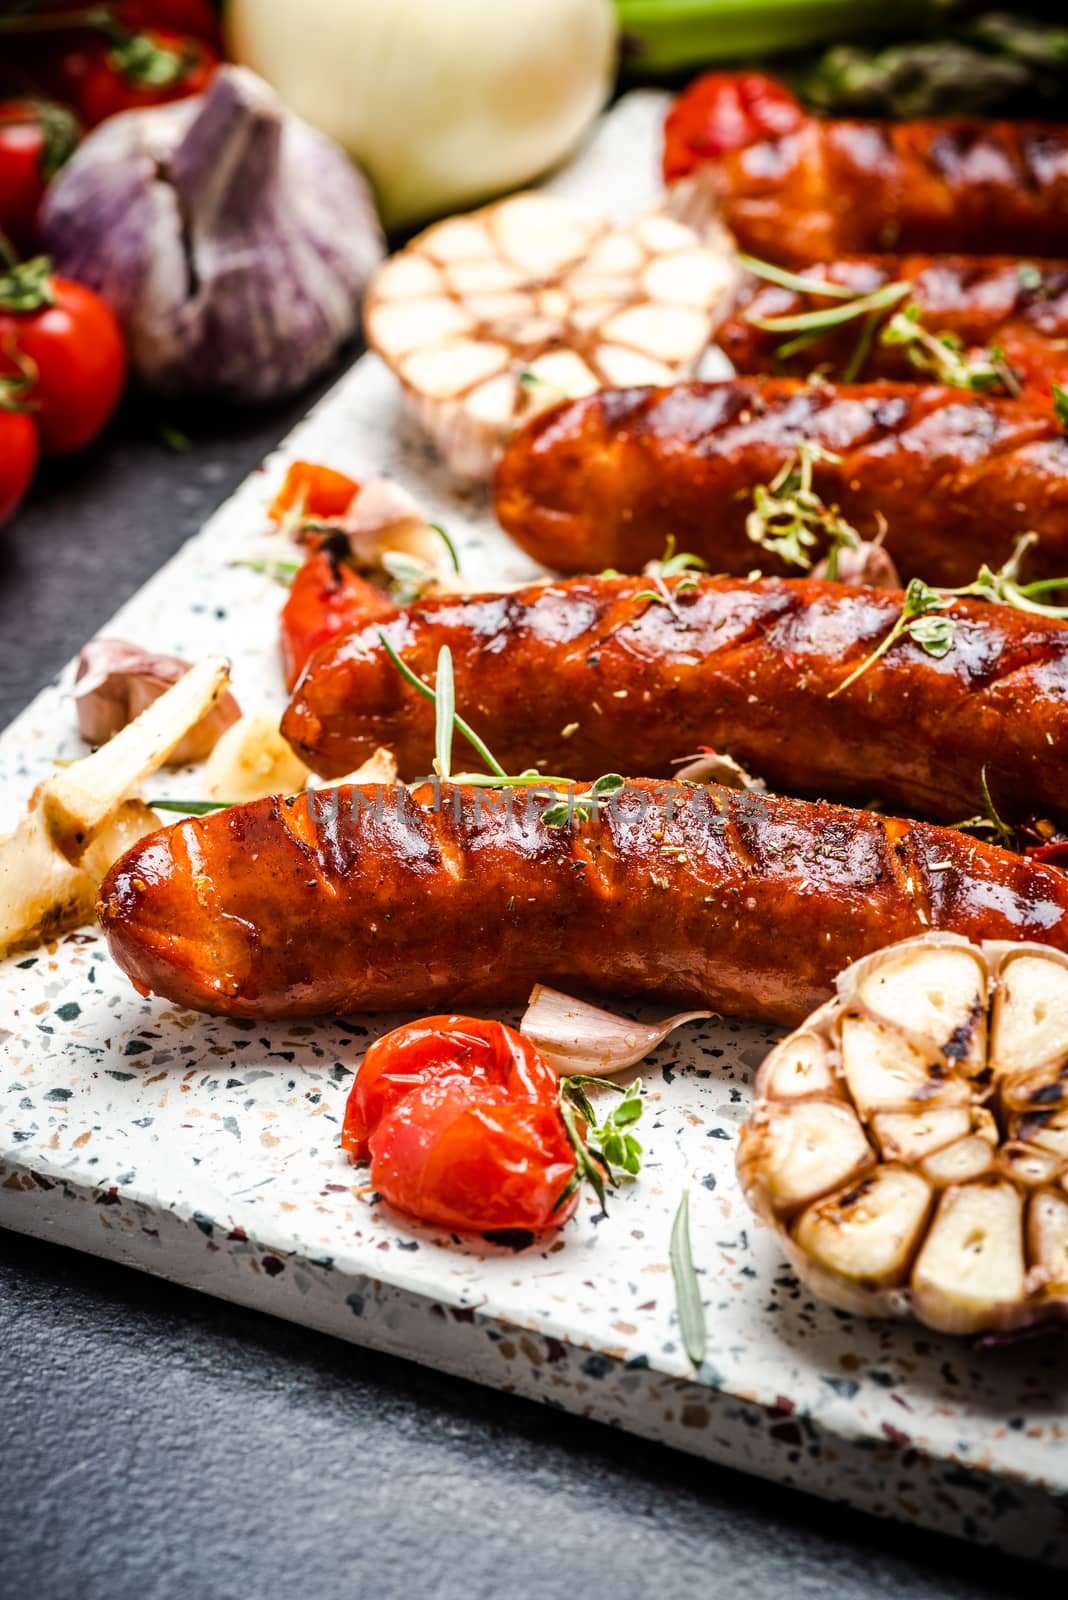 Barbecue Pork Sausages with Grilled Vegetables,Garlic, Herbs and Spices.